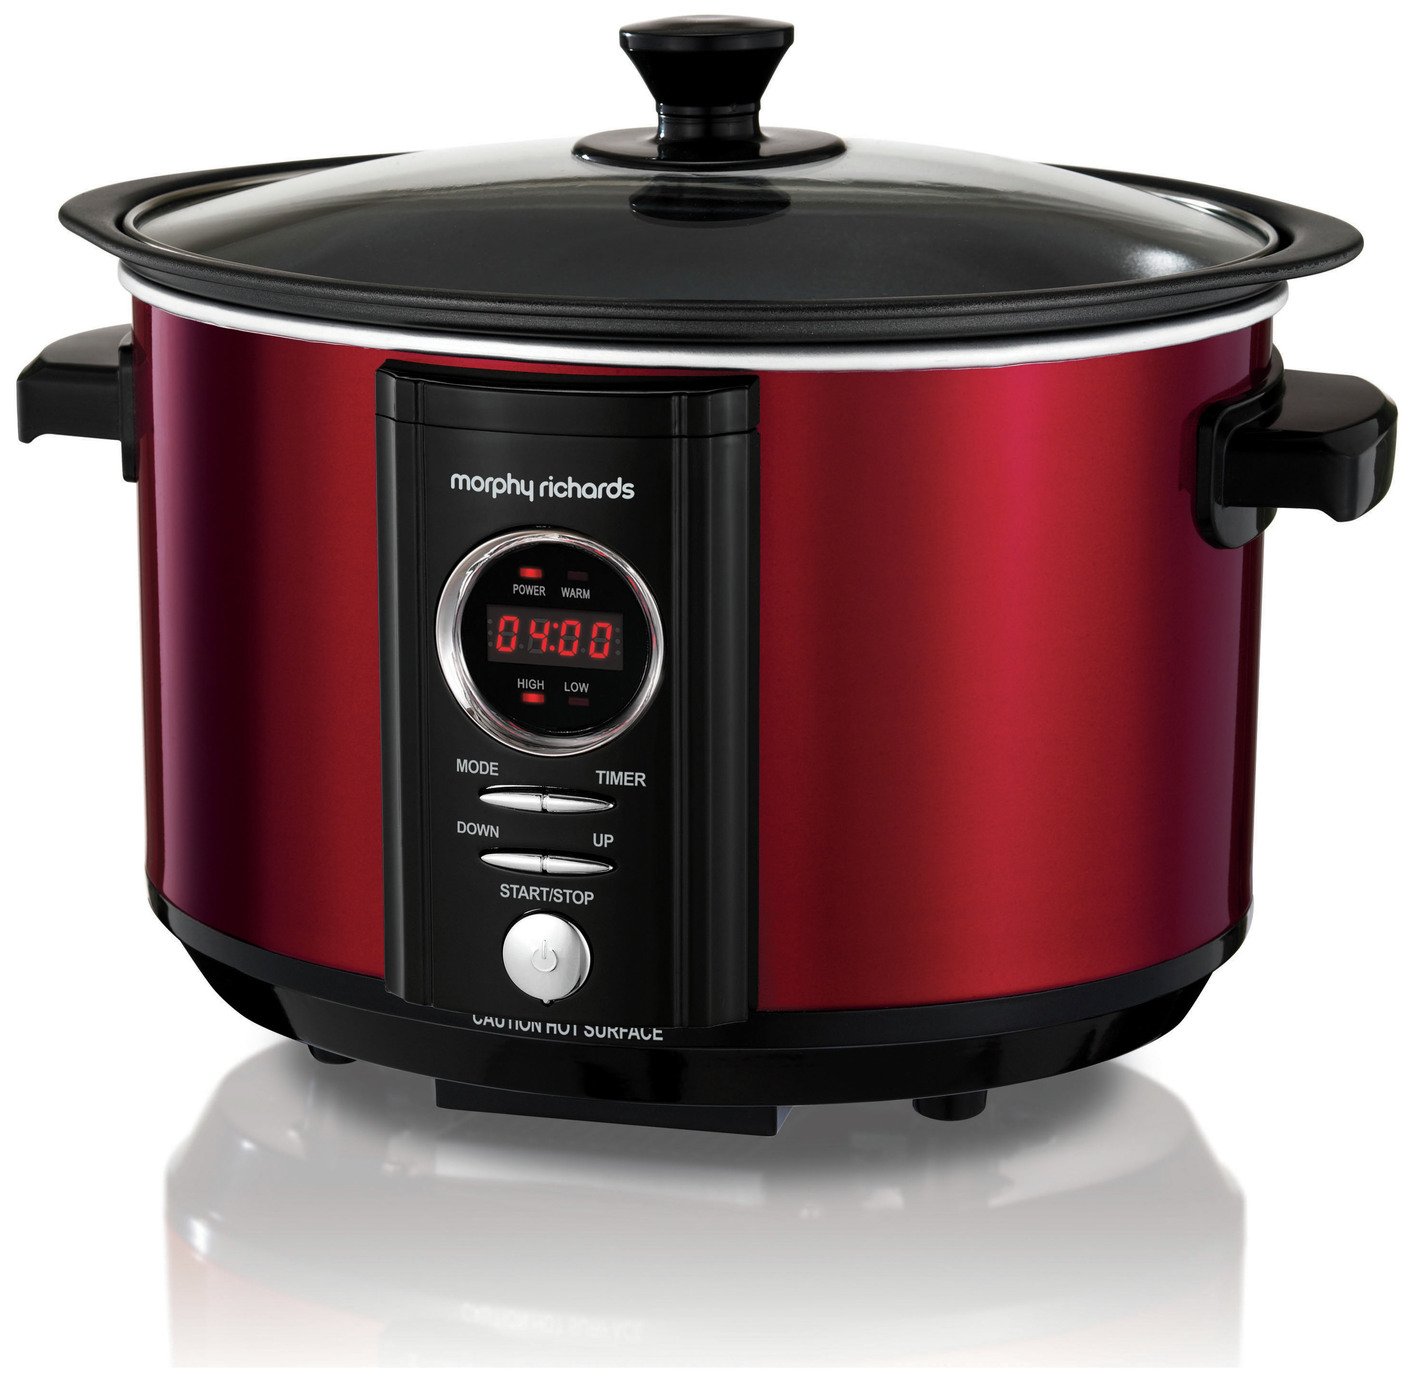 Morphy Richards 3.5L Digital Sear & Stew Slow Cooker review